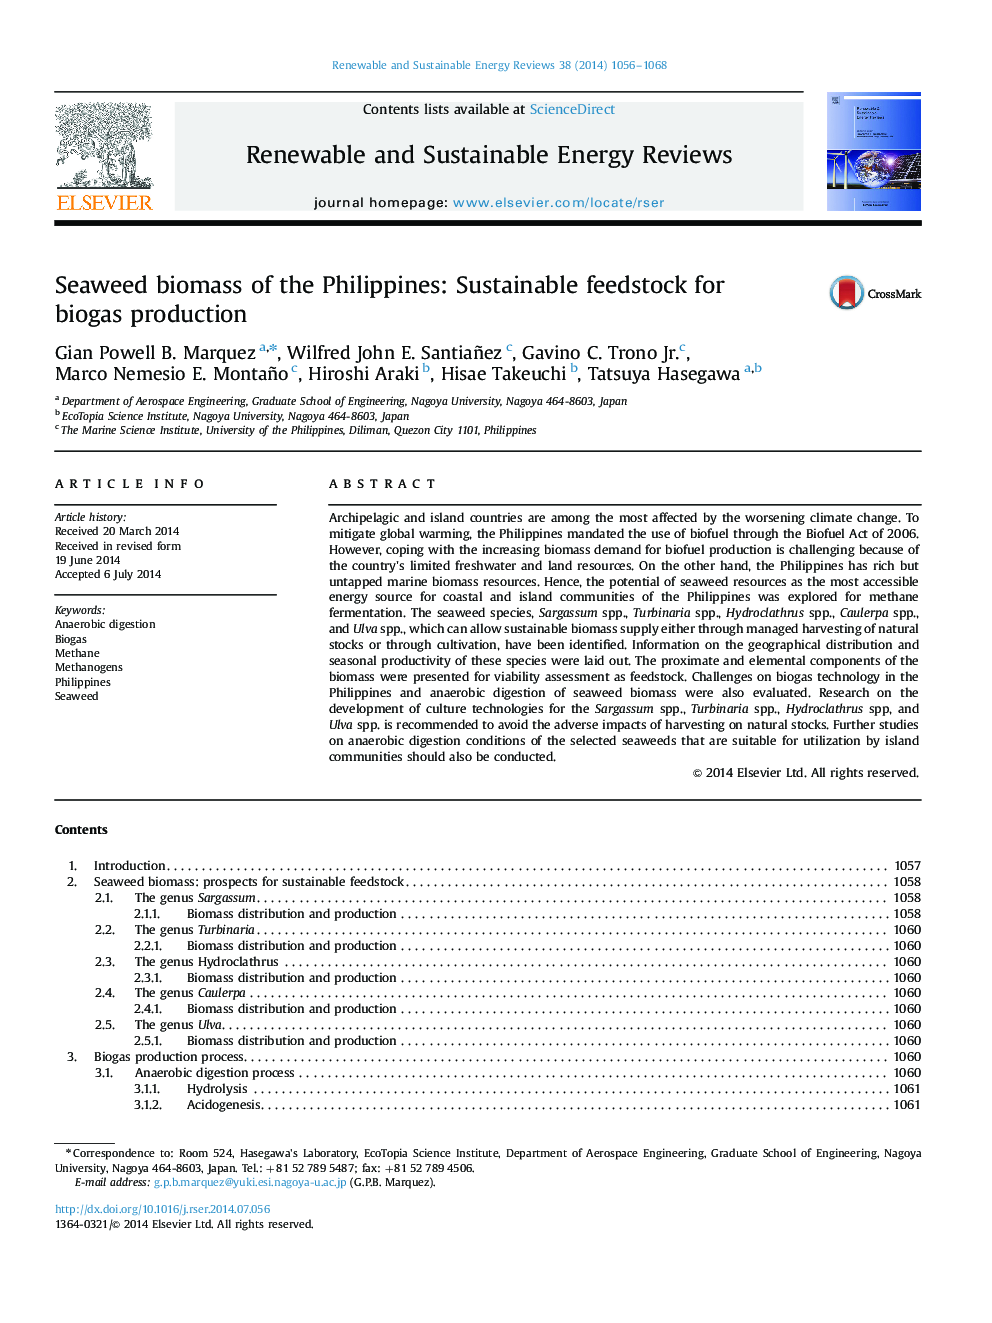 Seaweed biomass of the Philippines: Sustainable feedstock for biogas production